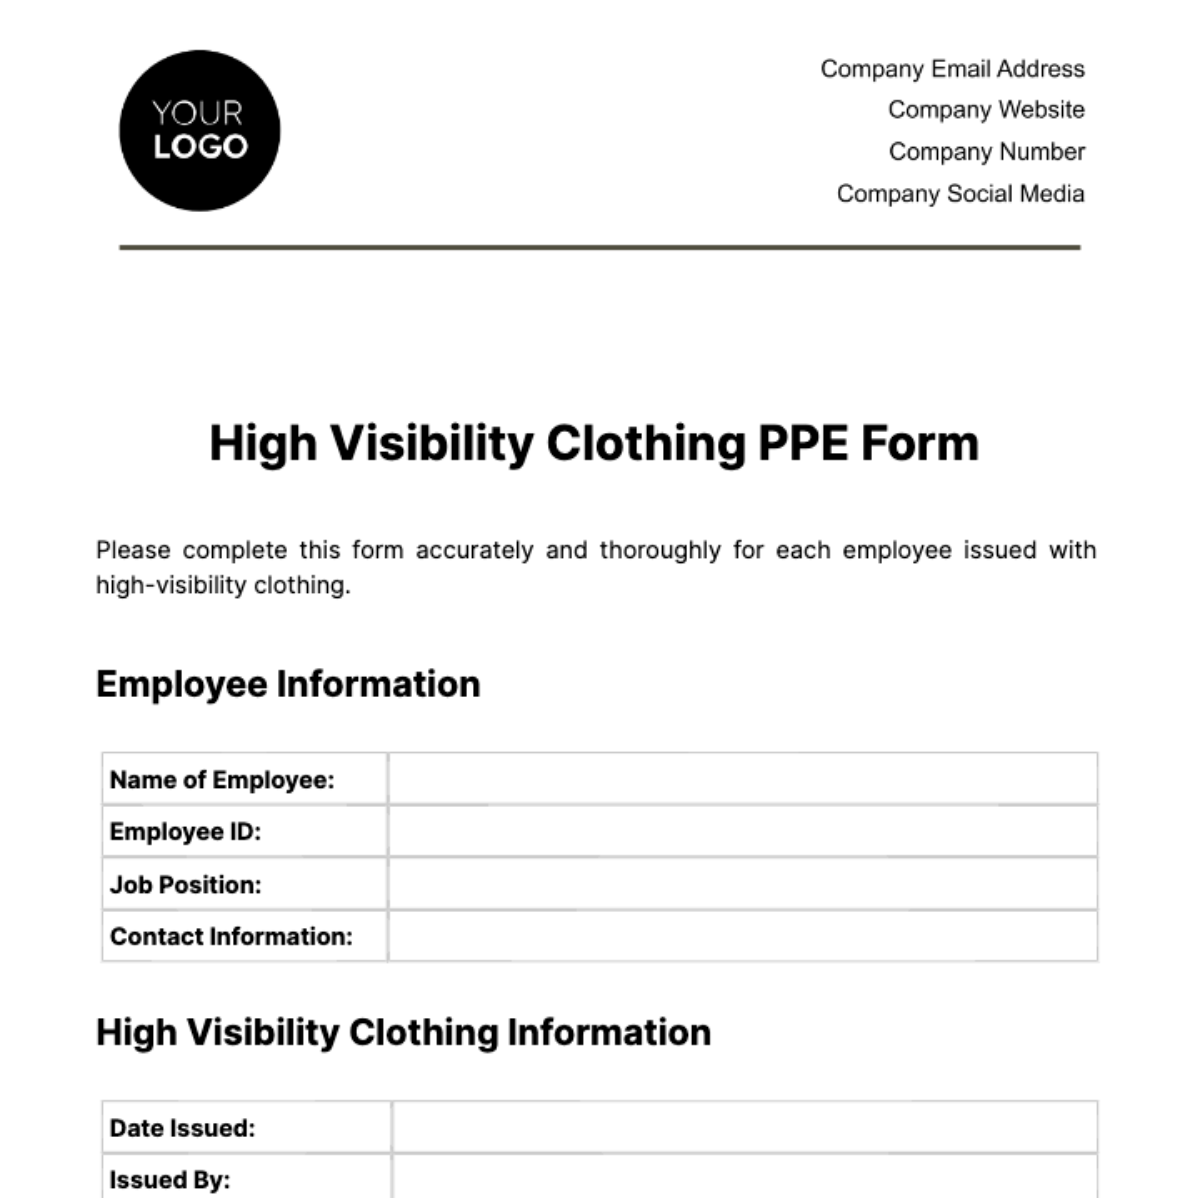 Free High Visibility Clothing PPE Form Template